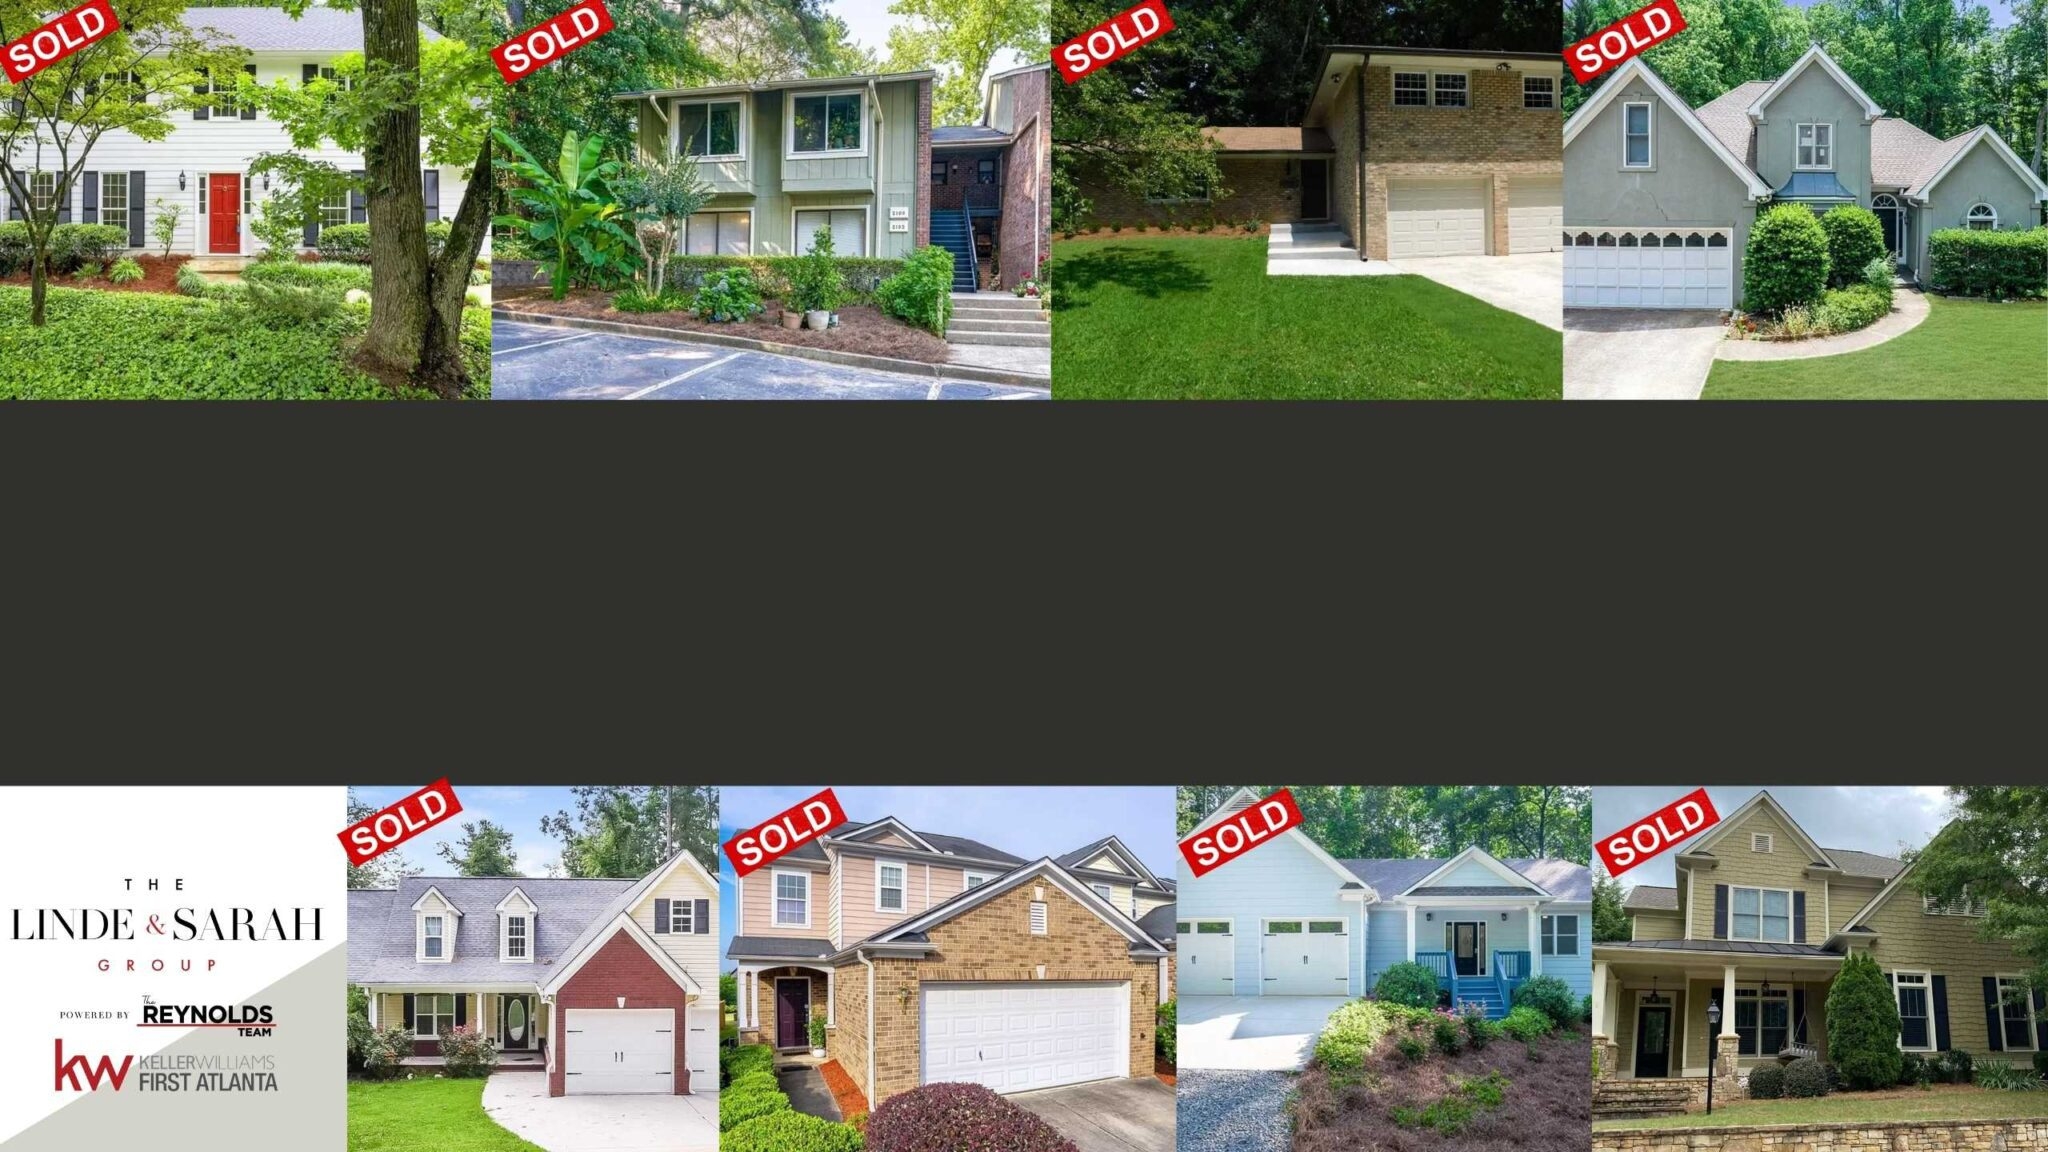 Recent Families Served! Homes Sold FAST & For Top-Dollar!